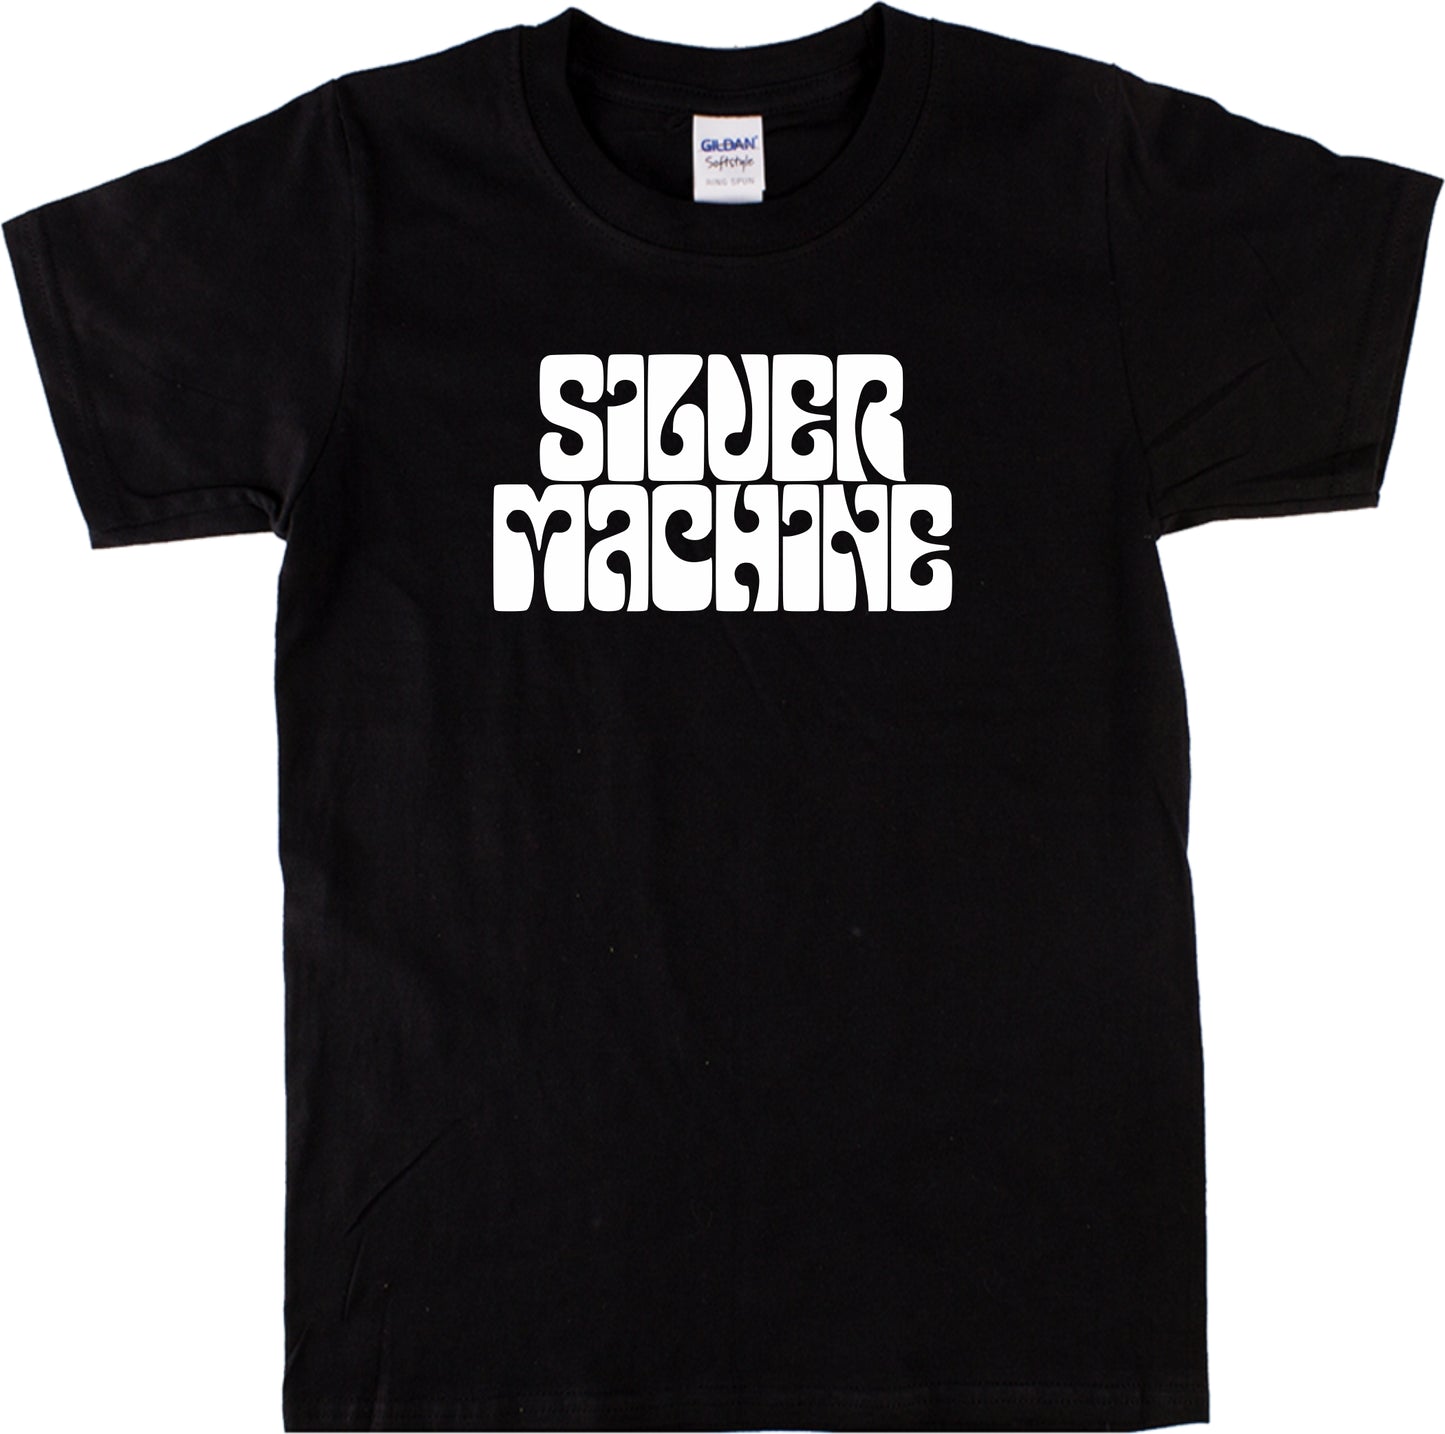 Silver Machine T-Shirt - Space Rock, 60s Psychedelic, S-XXL